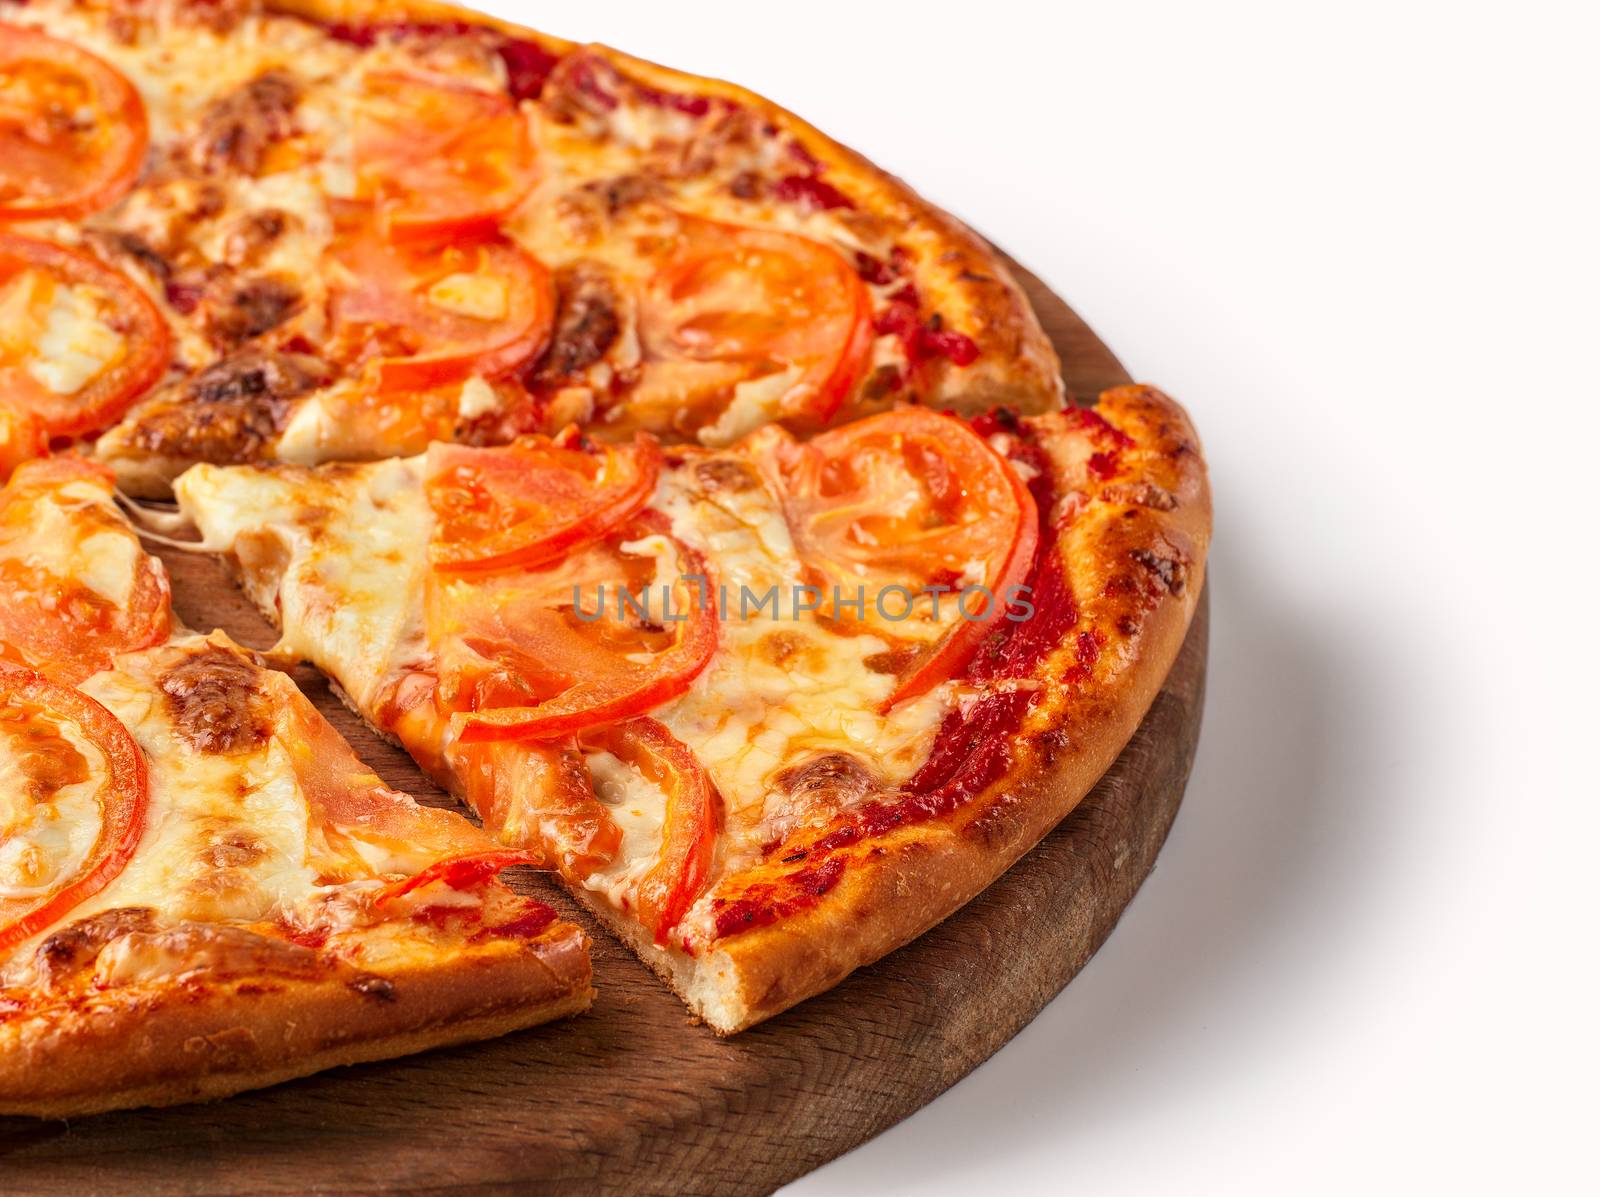 Close up view on piece of pizza with tomato and cheese on wooden cutting board. Isolated on white with clipping path